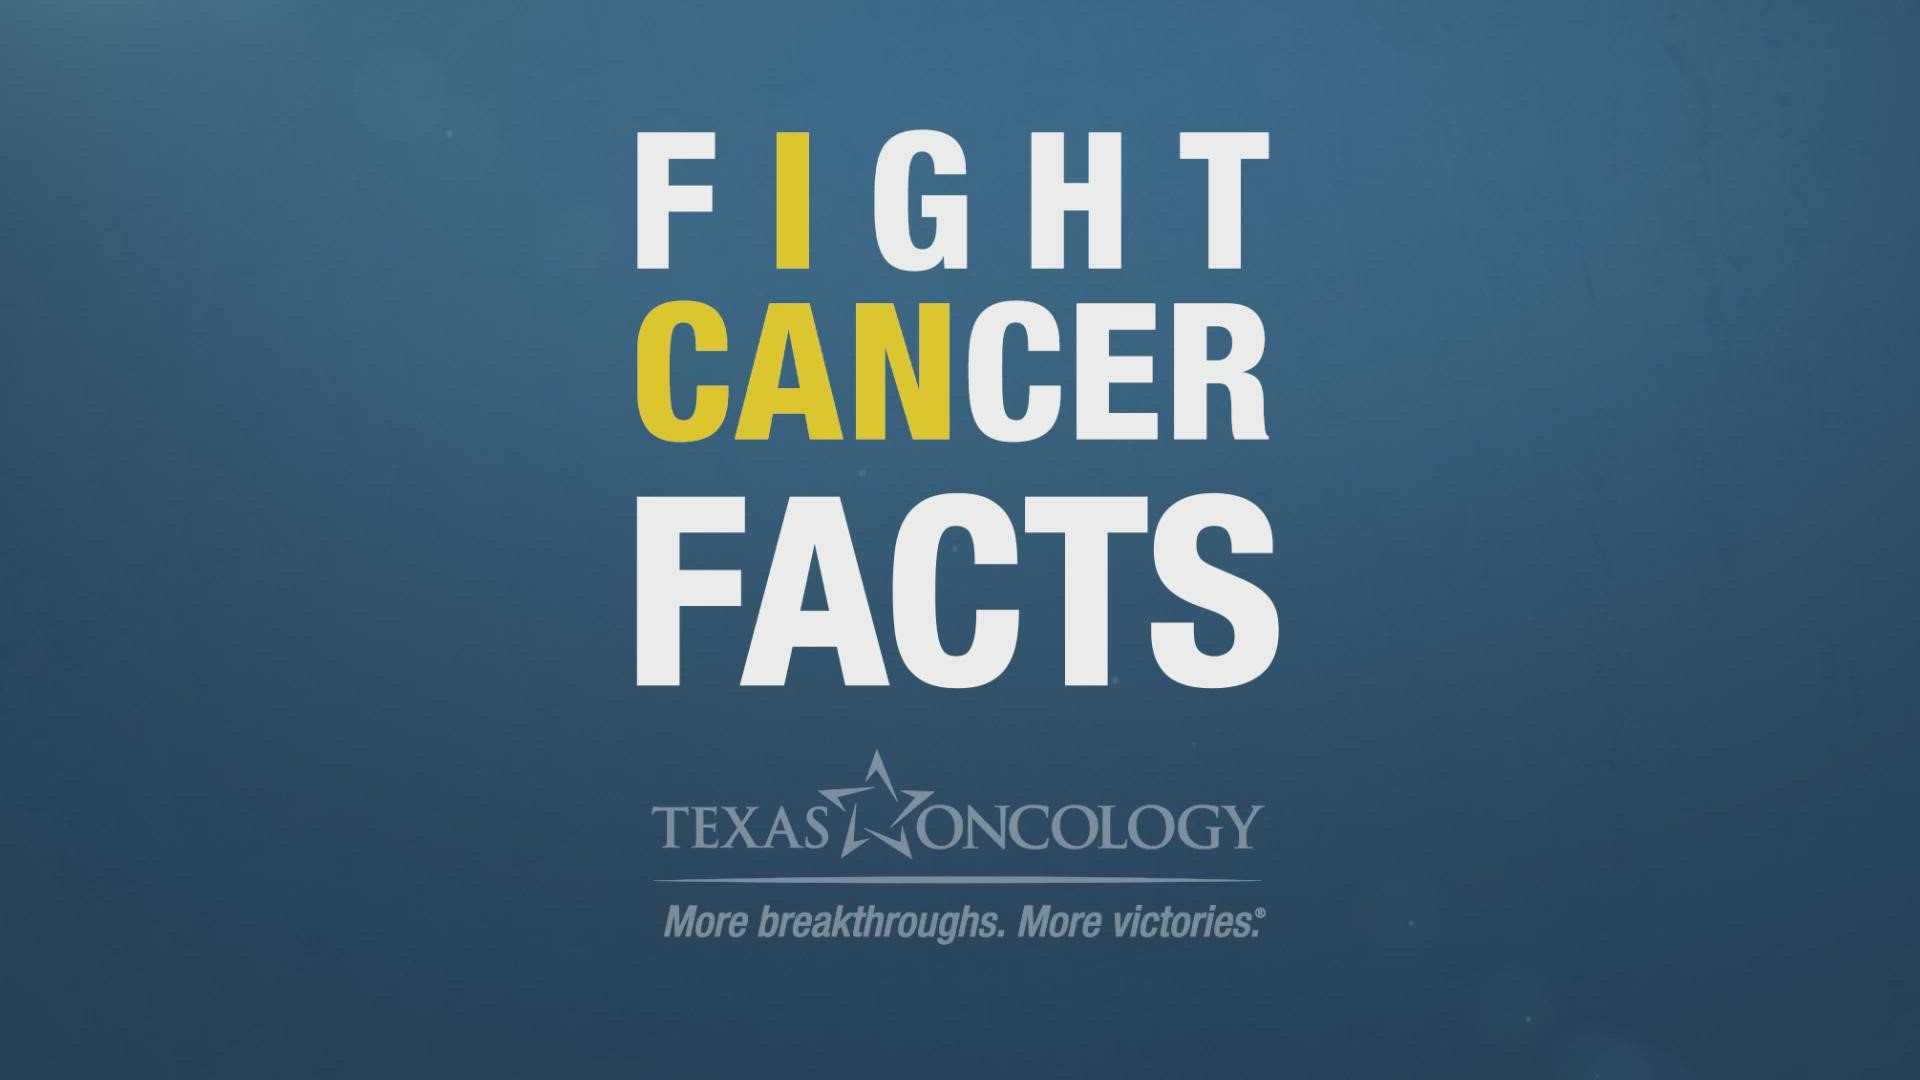 Local Texas Oncology doctor shares how to lower the risk of prostate cancer in men with early detection before it spreads to achieve a nearly 100% chance of survival